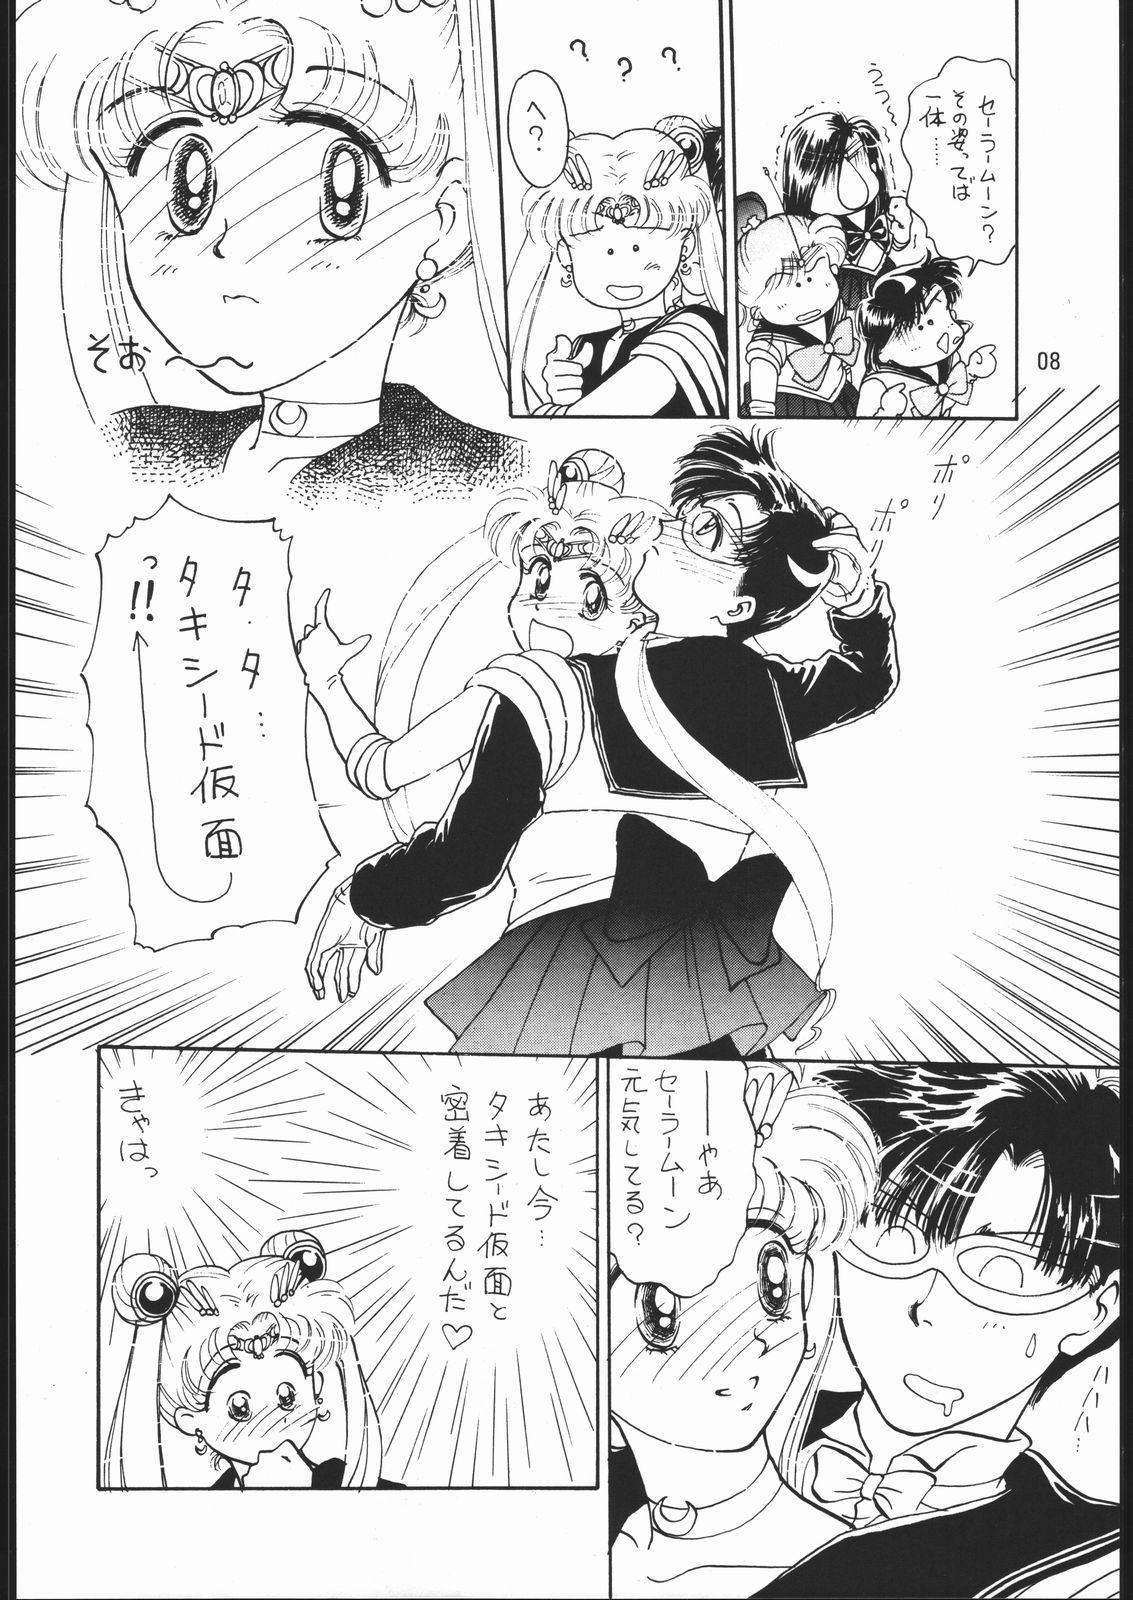 Anal Licking うさぎがピョン!! - Sailor moon Ohmibod - Page 7